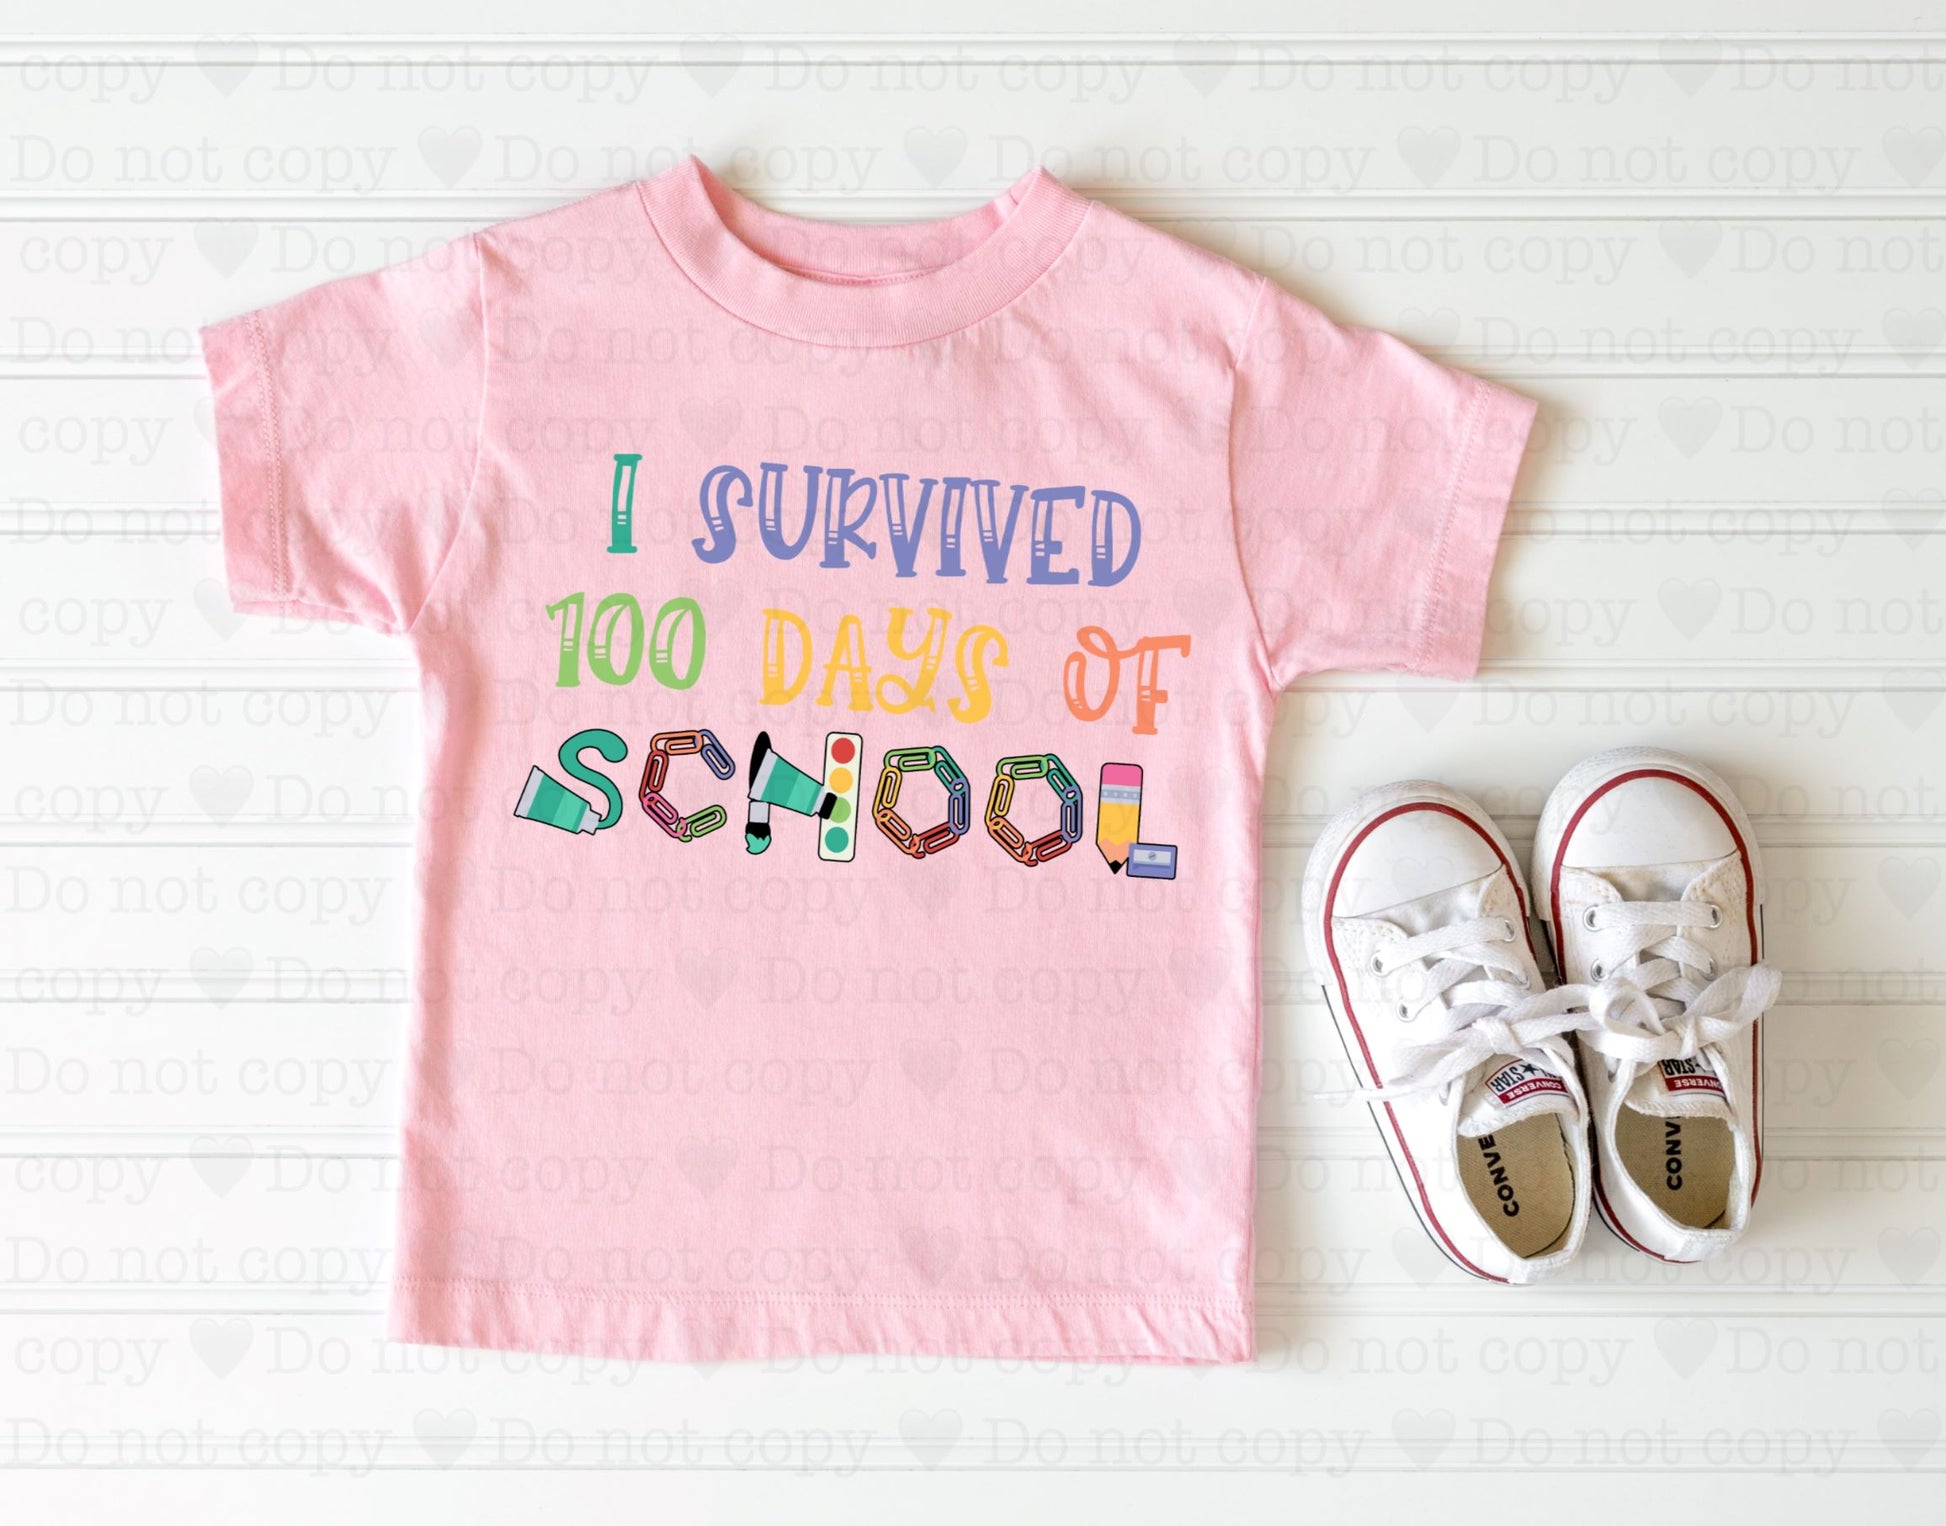 I Survived 100 Days Of School – The Transfer Store